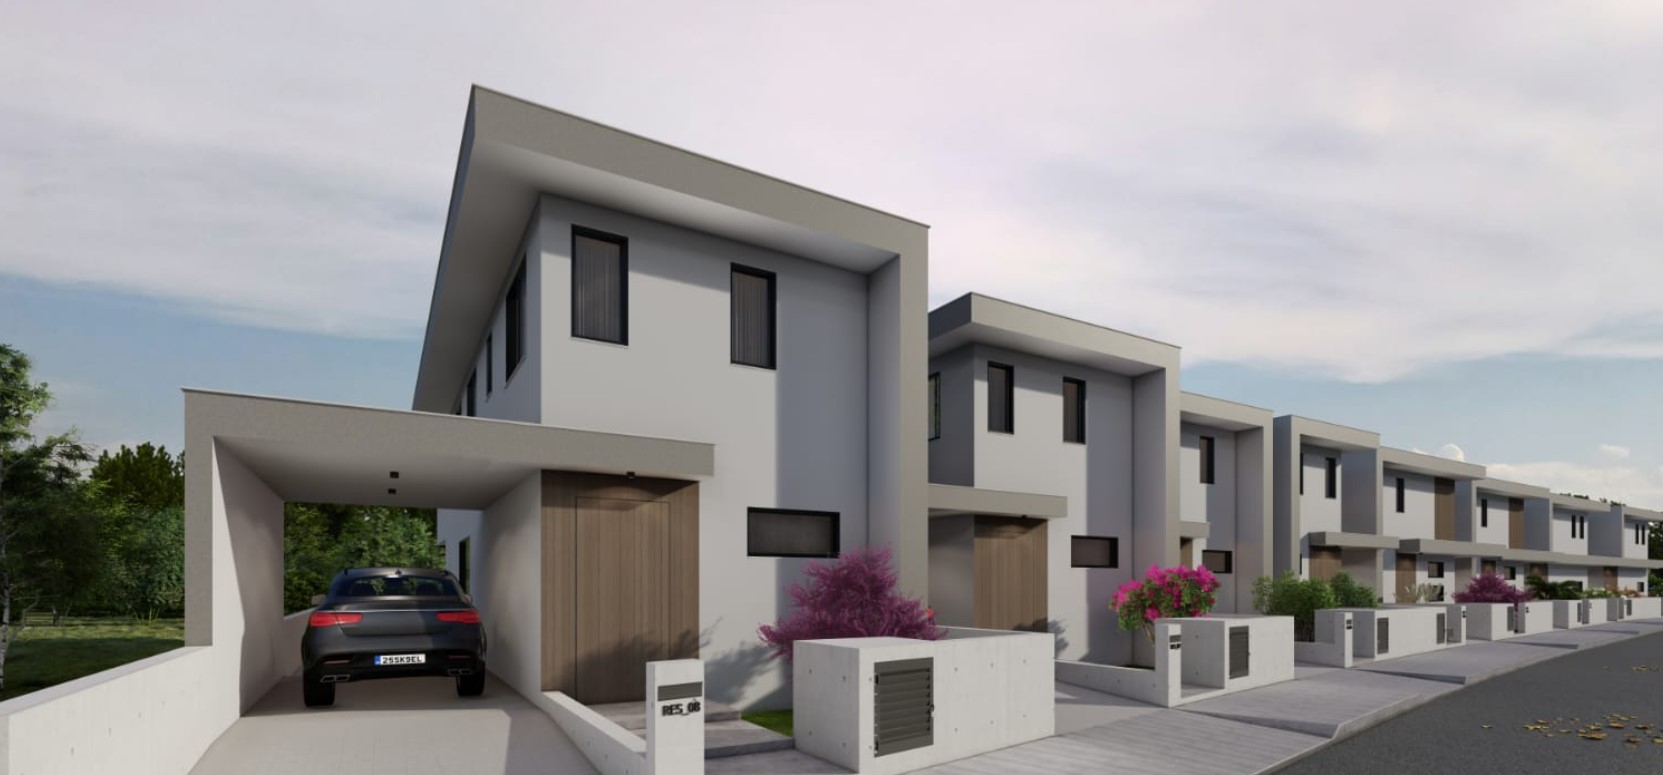 3 Bedroom House for Sale in Anglisides, Larnaca District